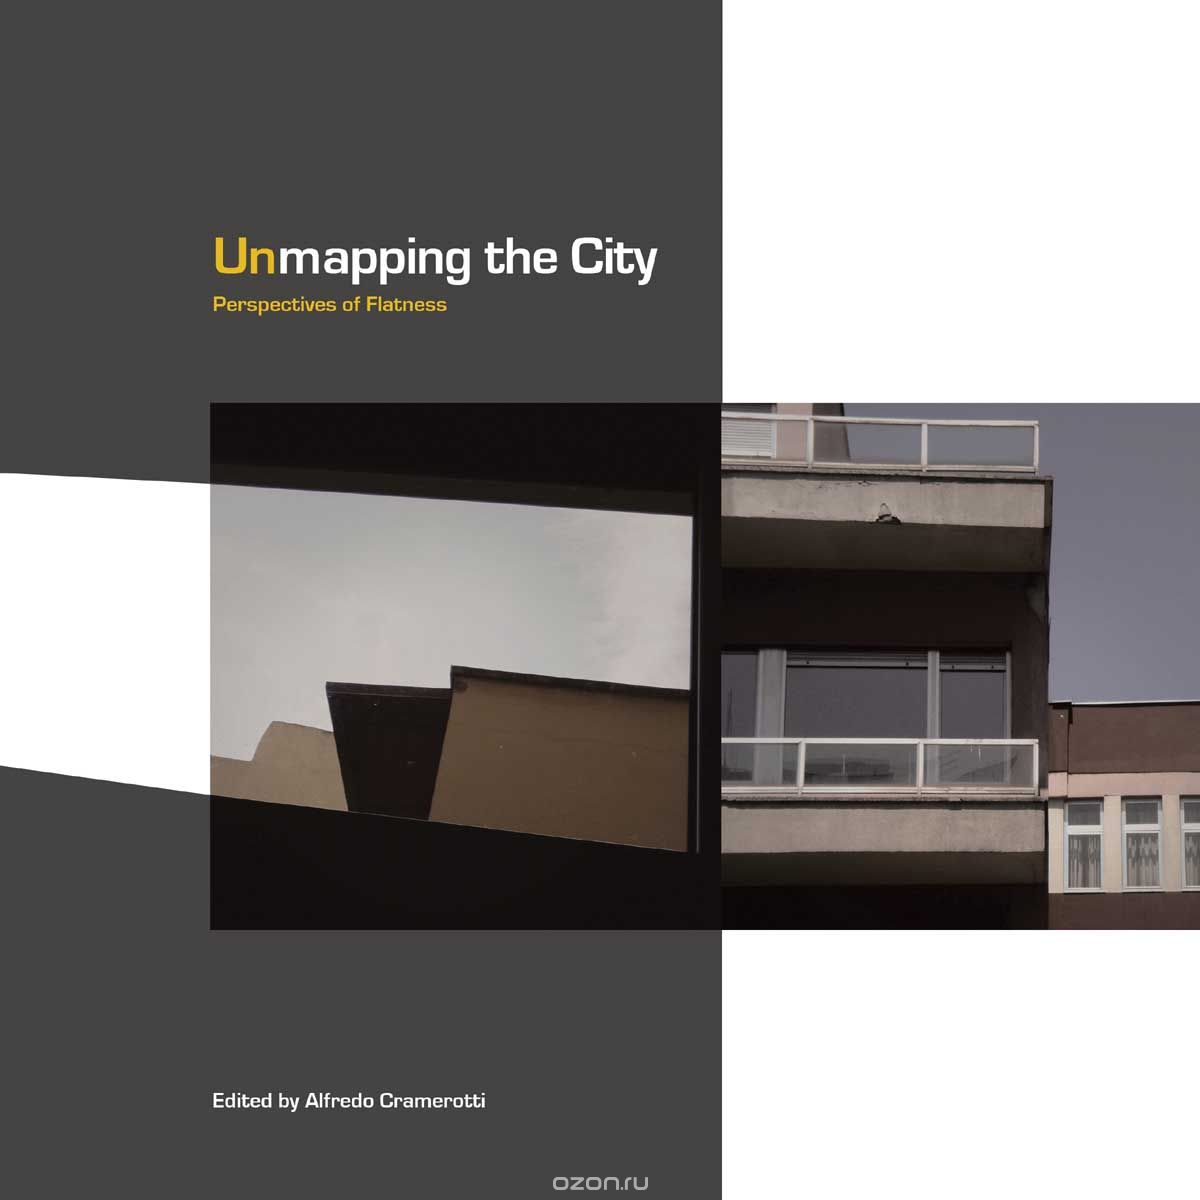 Unmapping the City – Perspectives of Flatness